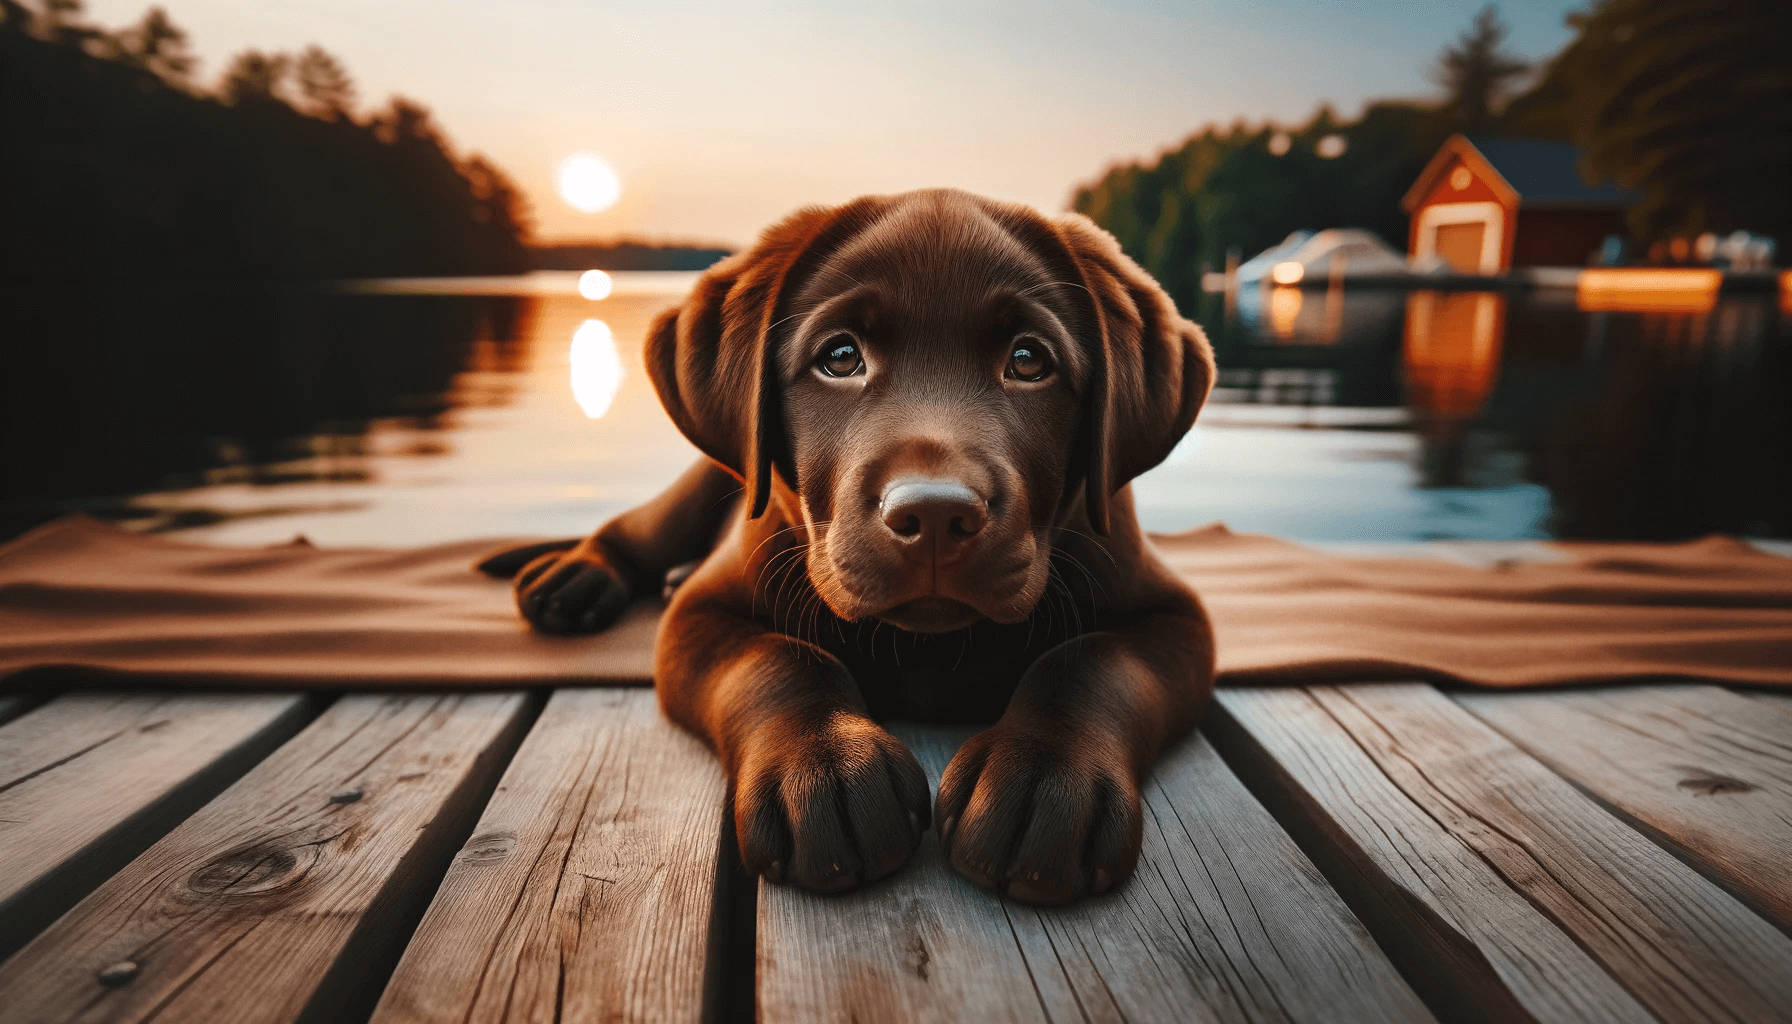 Chocolate Lab Puppy with Reflective Eyes by a Peaceful Lake at Sunset